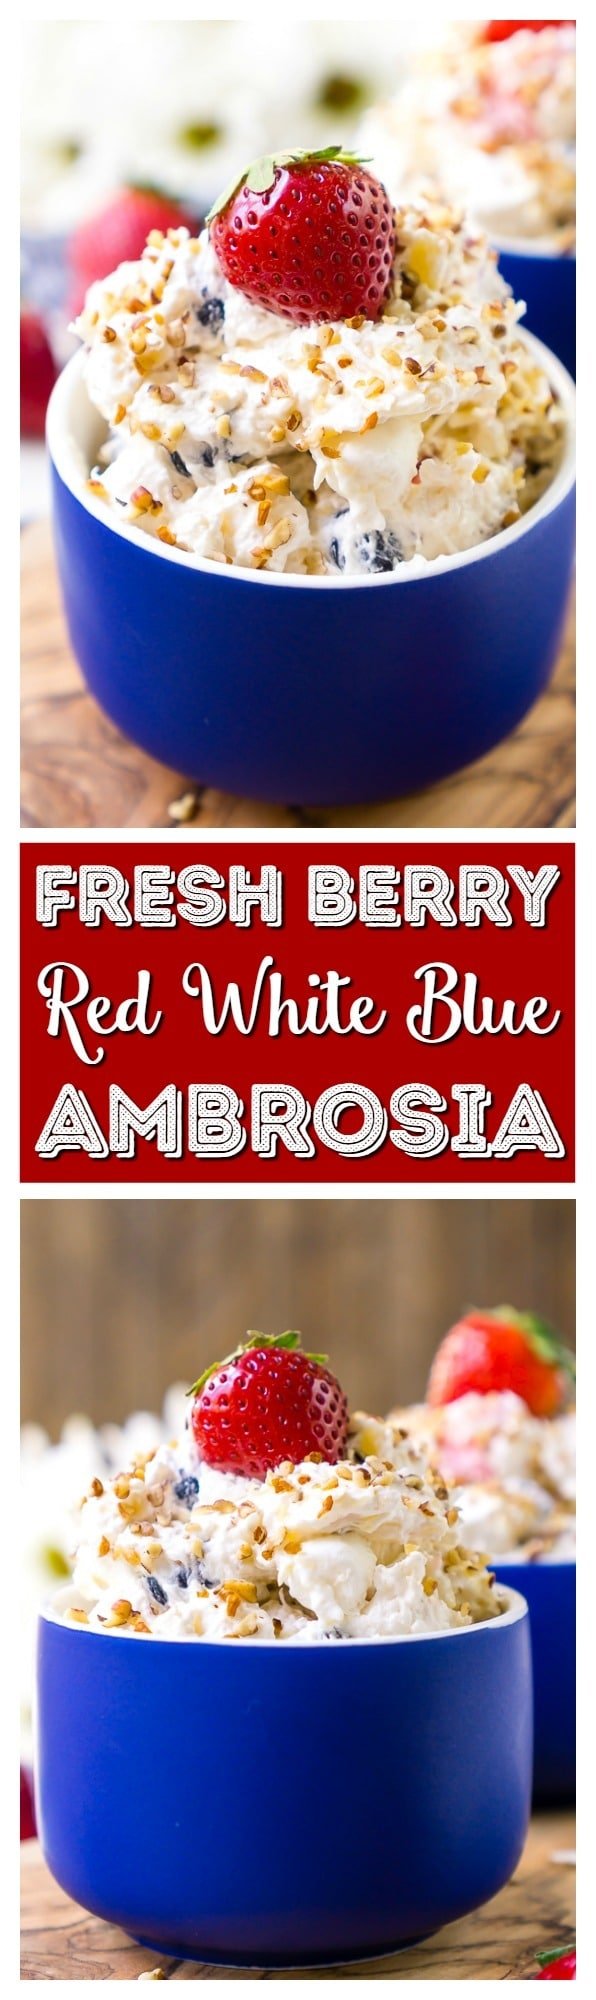 This Red White & Blue Ambrosia Salad is a delicious, no-bake, retro dessert recipe that's easy, addictive, and loaded with strawberries, blueberries, coconut, and pineapple! via @sugarandsoulco